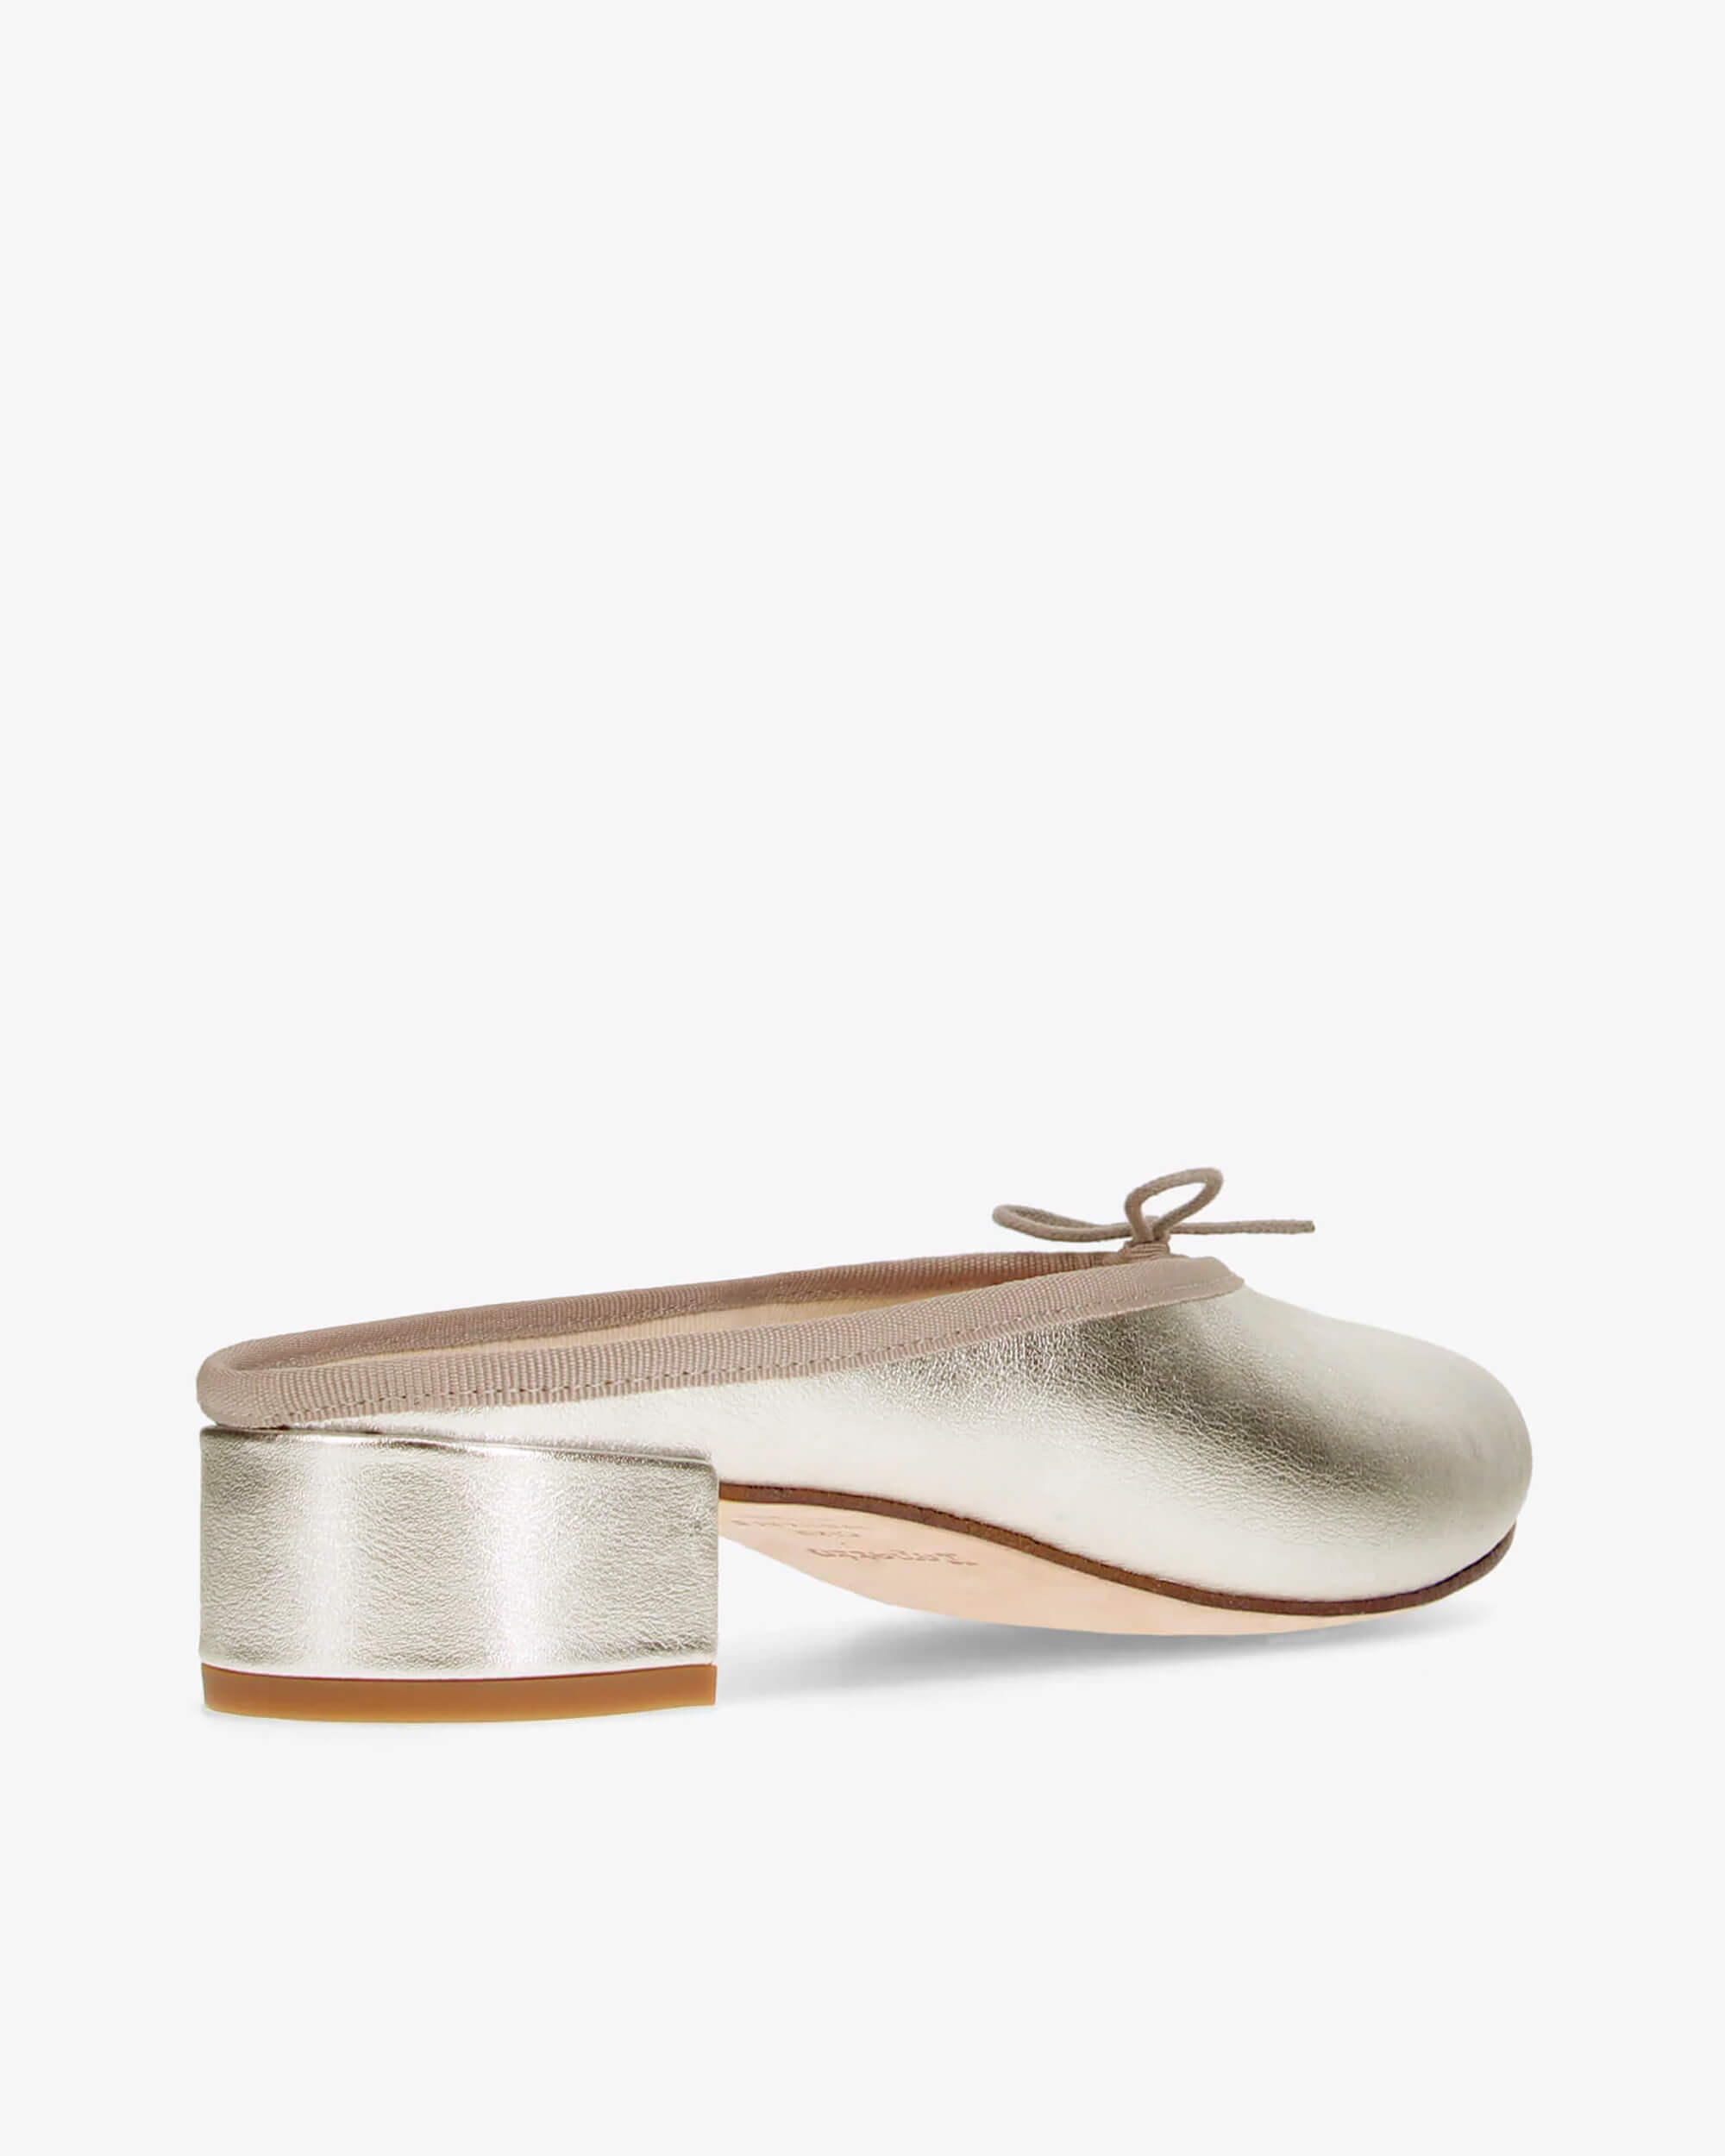 Shoes Collection – Repetto